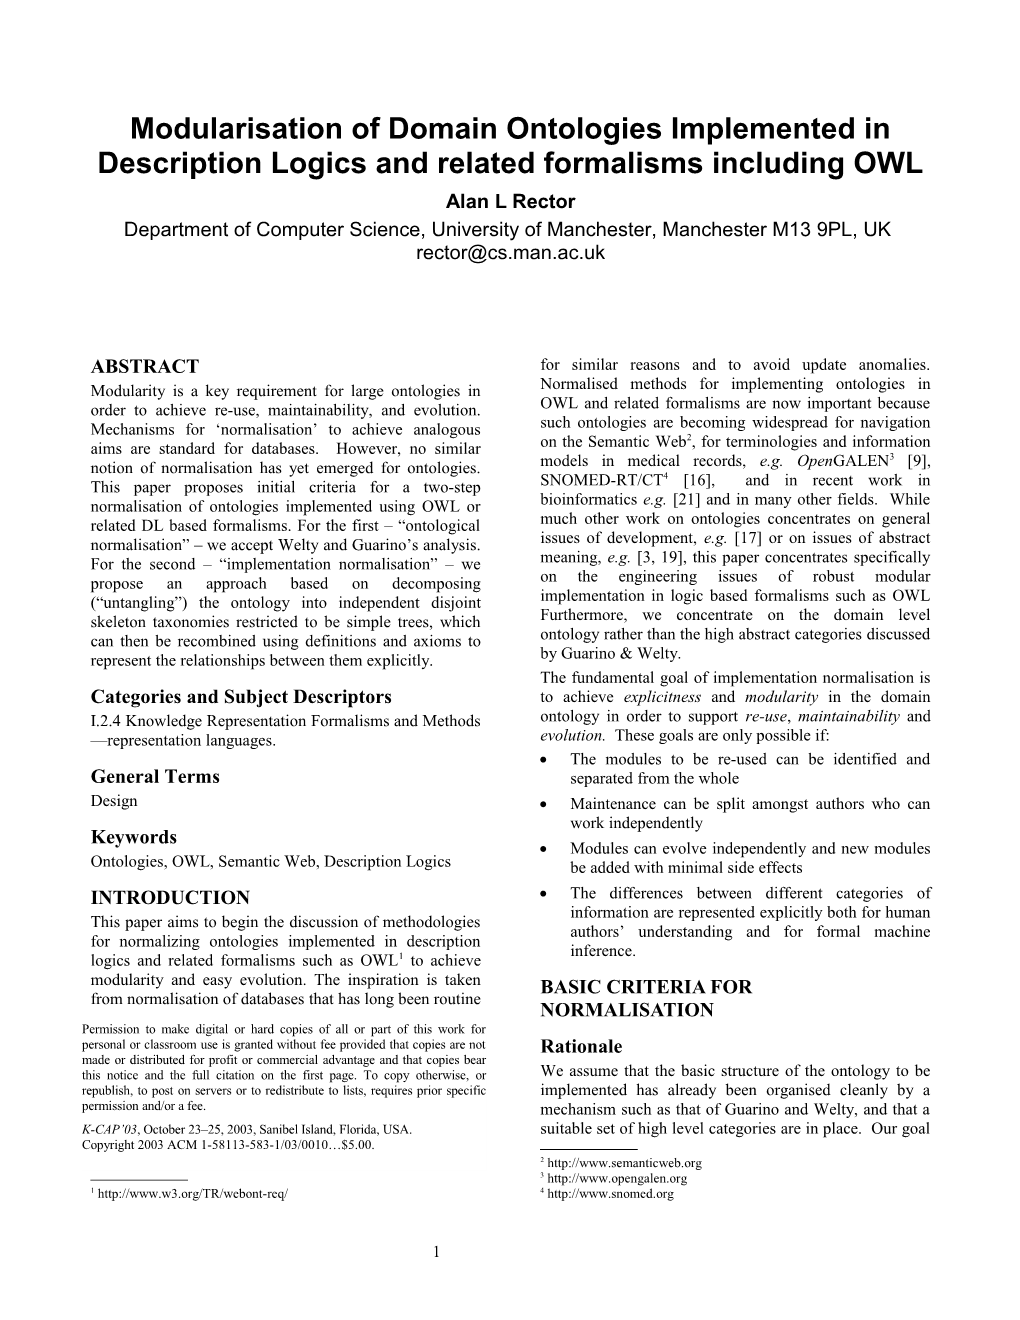 Modularisation of Domain Ontologies Implemented in Description Logics and Related Formalisms